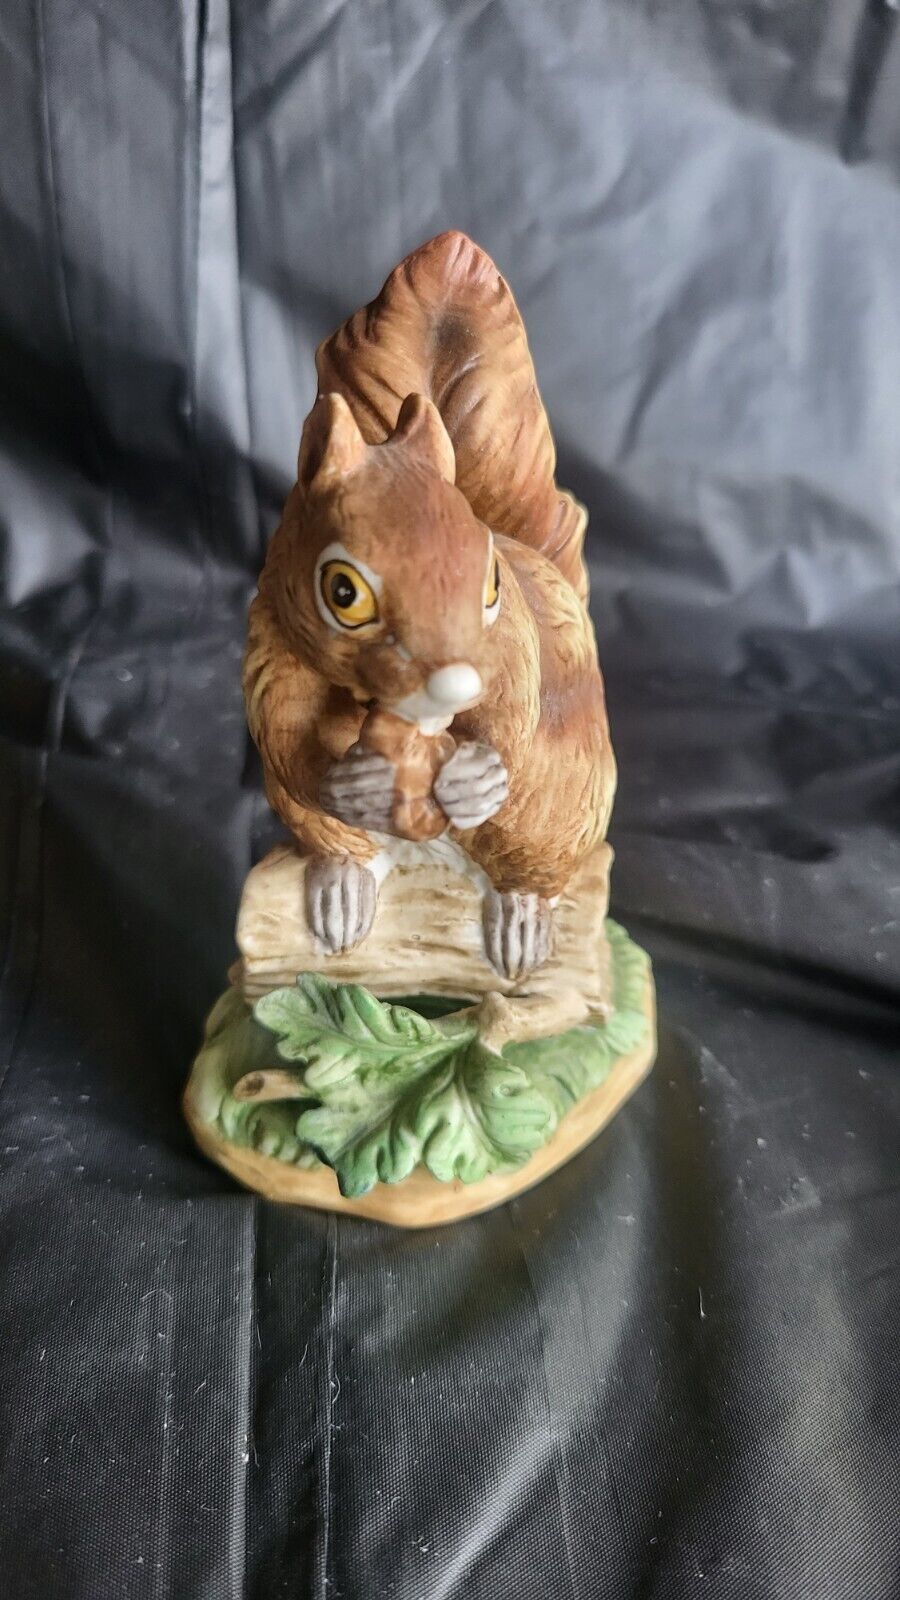  Animal Squirrel Figurine Statue 4in Tall Sitting On a Log eating a nut Vintage 